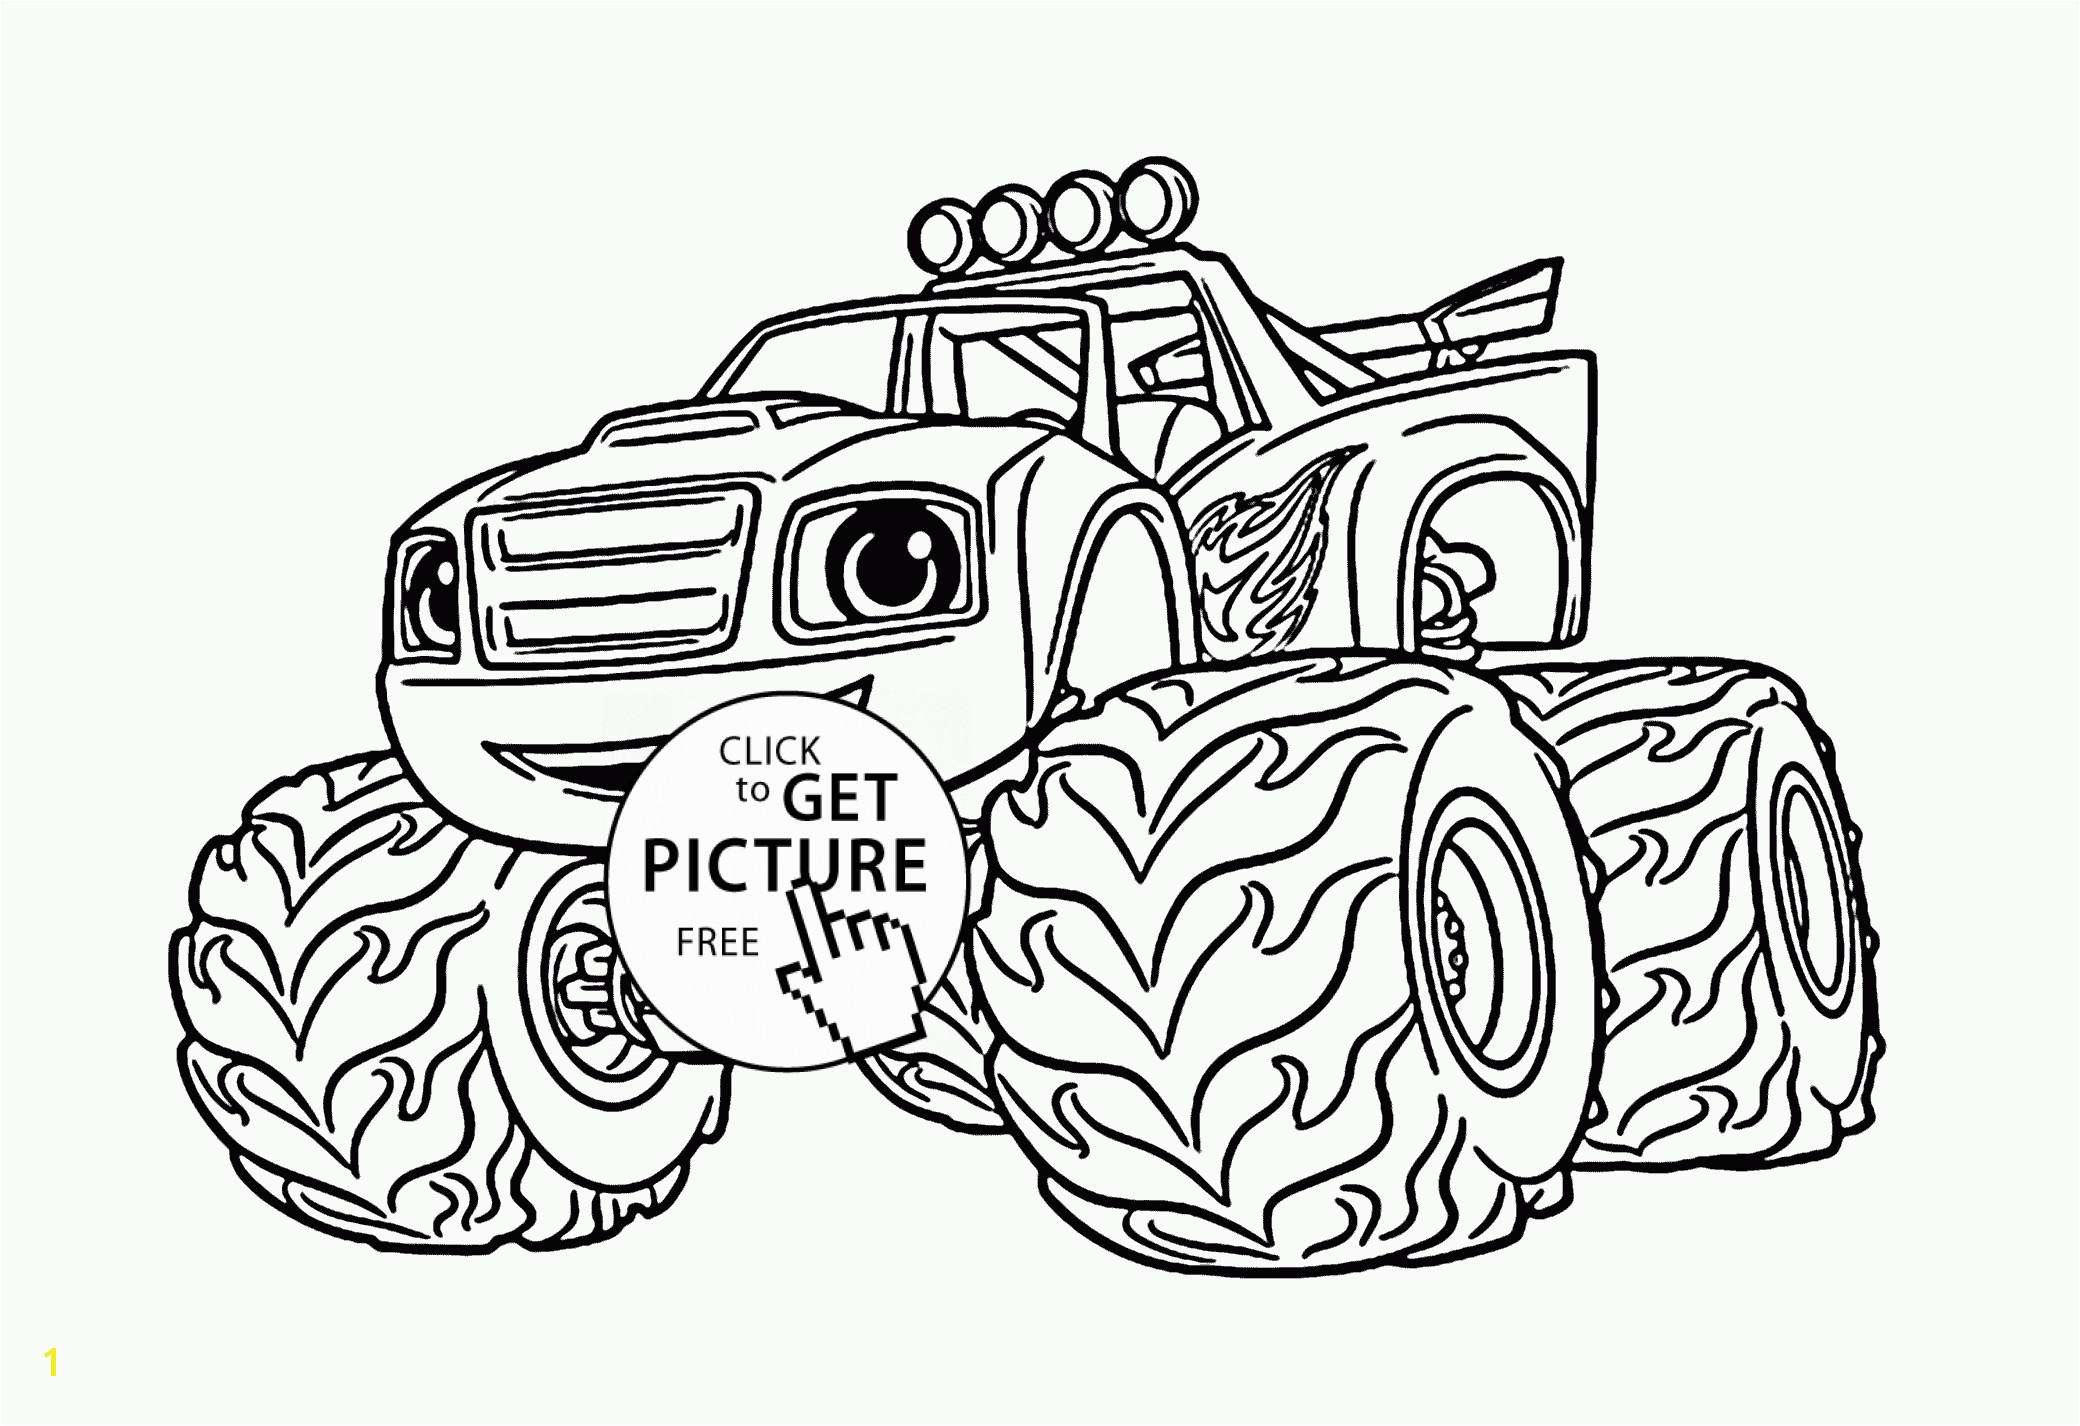 Coloring Pages Of Huge Monster Trucks Truck Drawing for Kids at Getdrawings